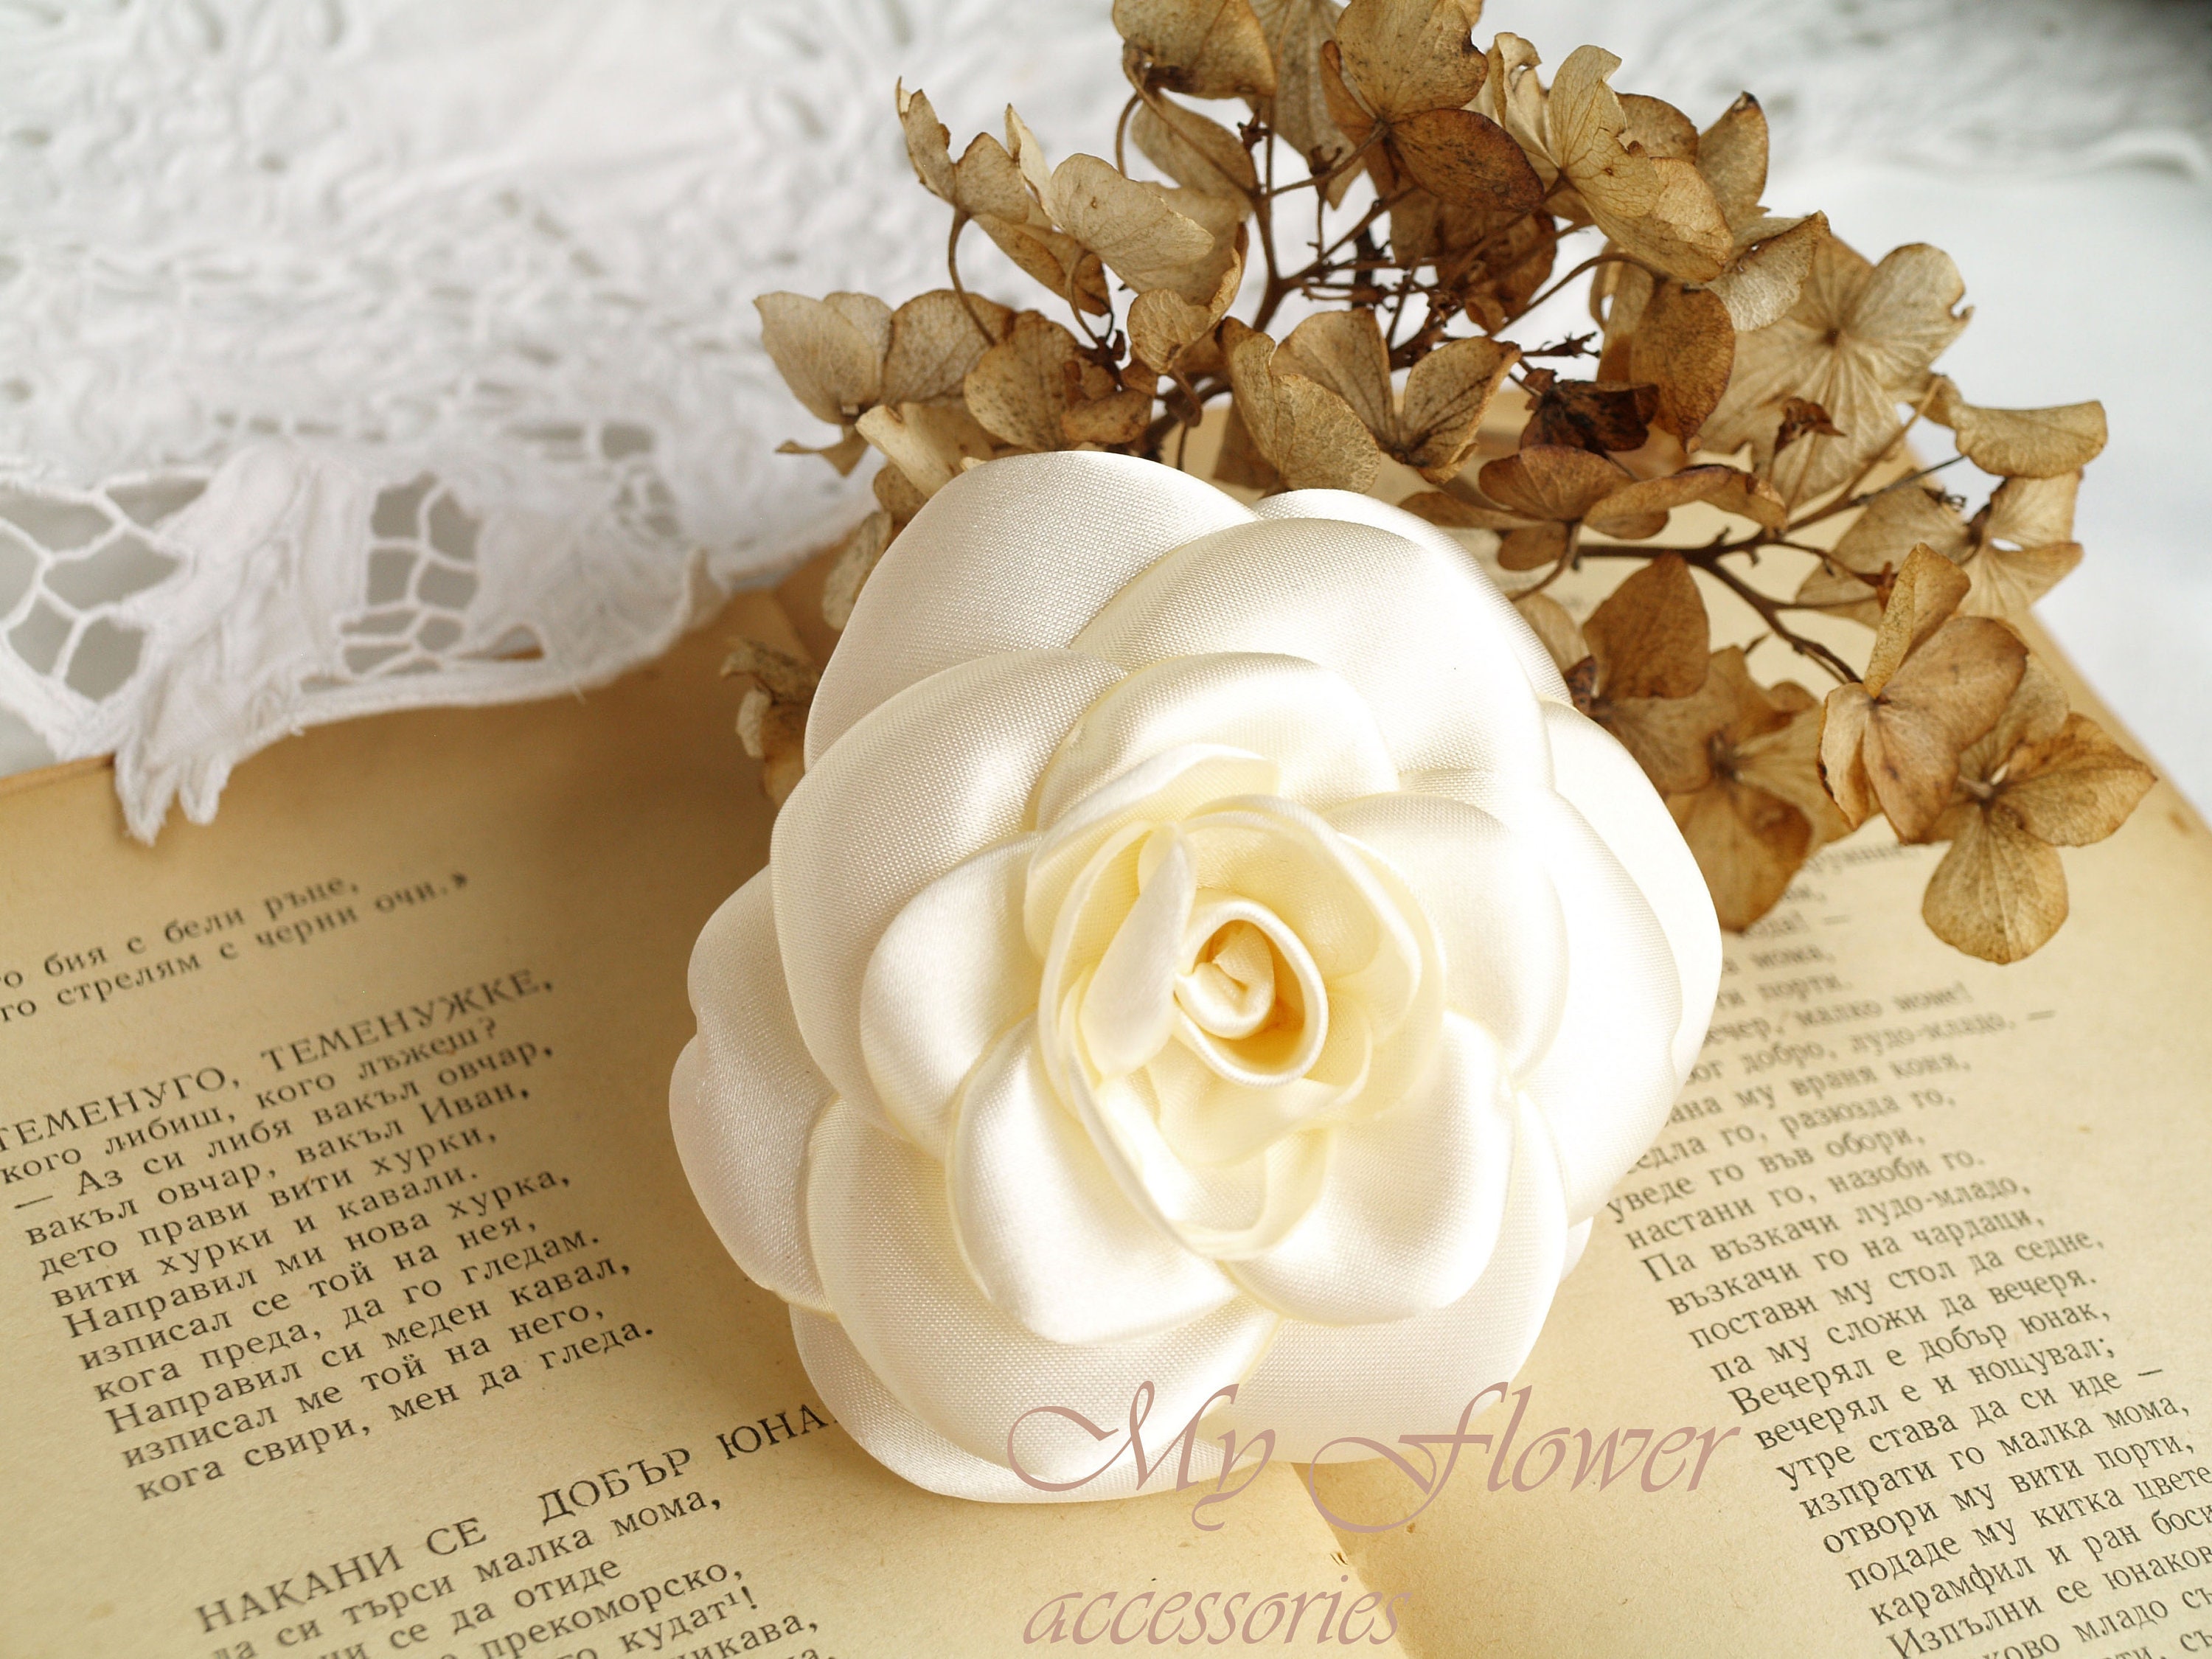 MyFlowerAccessories Creamy White Silk Flower Broach, Satin Flower Pin, Fabric Camellia Broche, Camellia Brooch Small, Camelia Pins, Nature Lovers Gift Woman